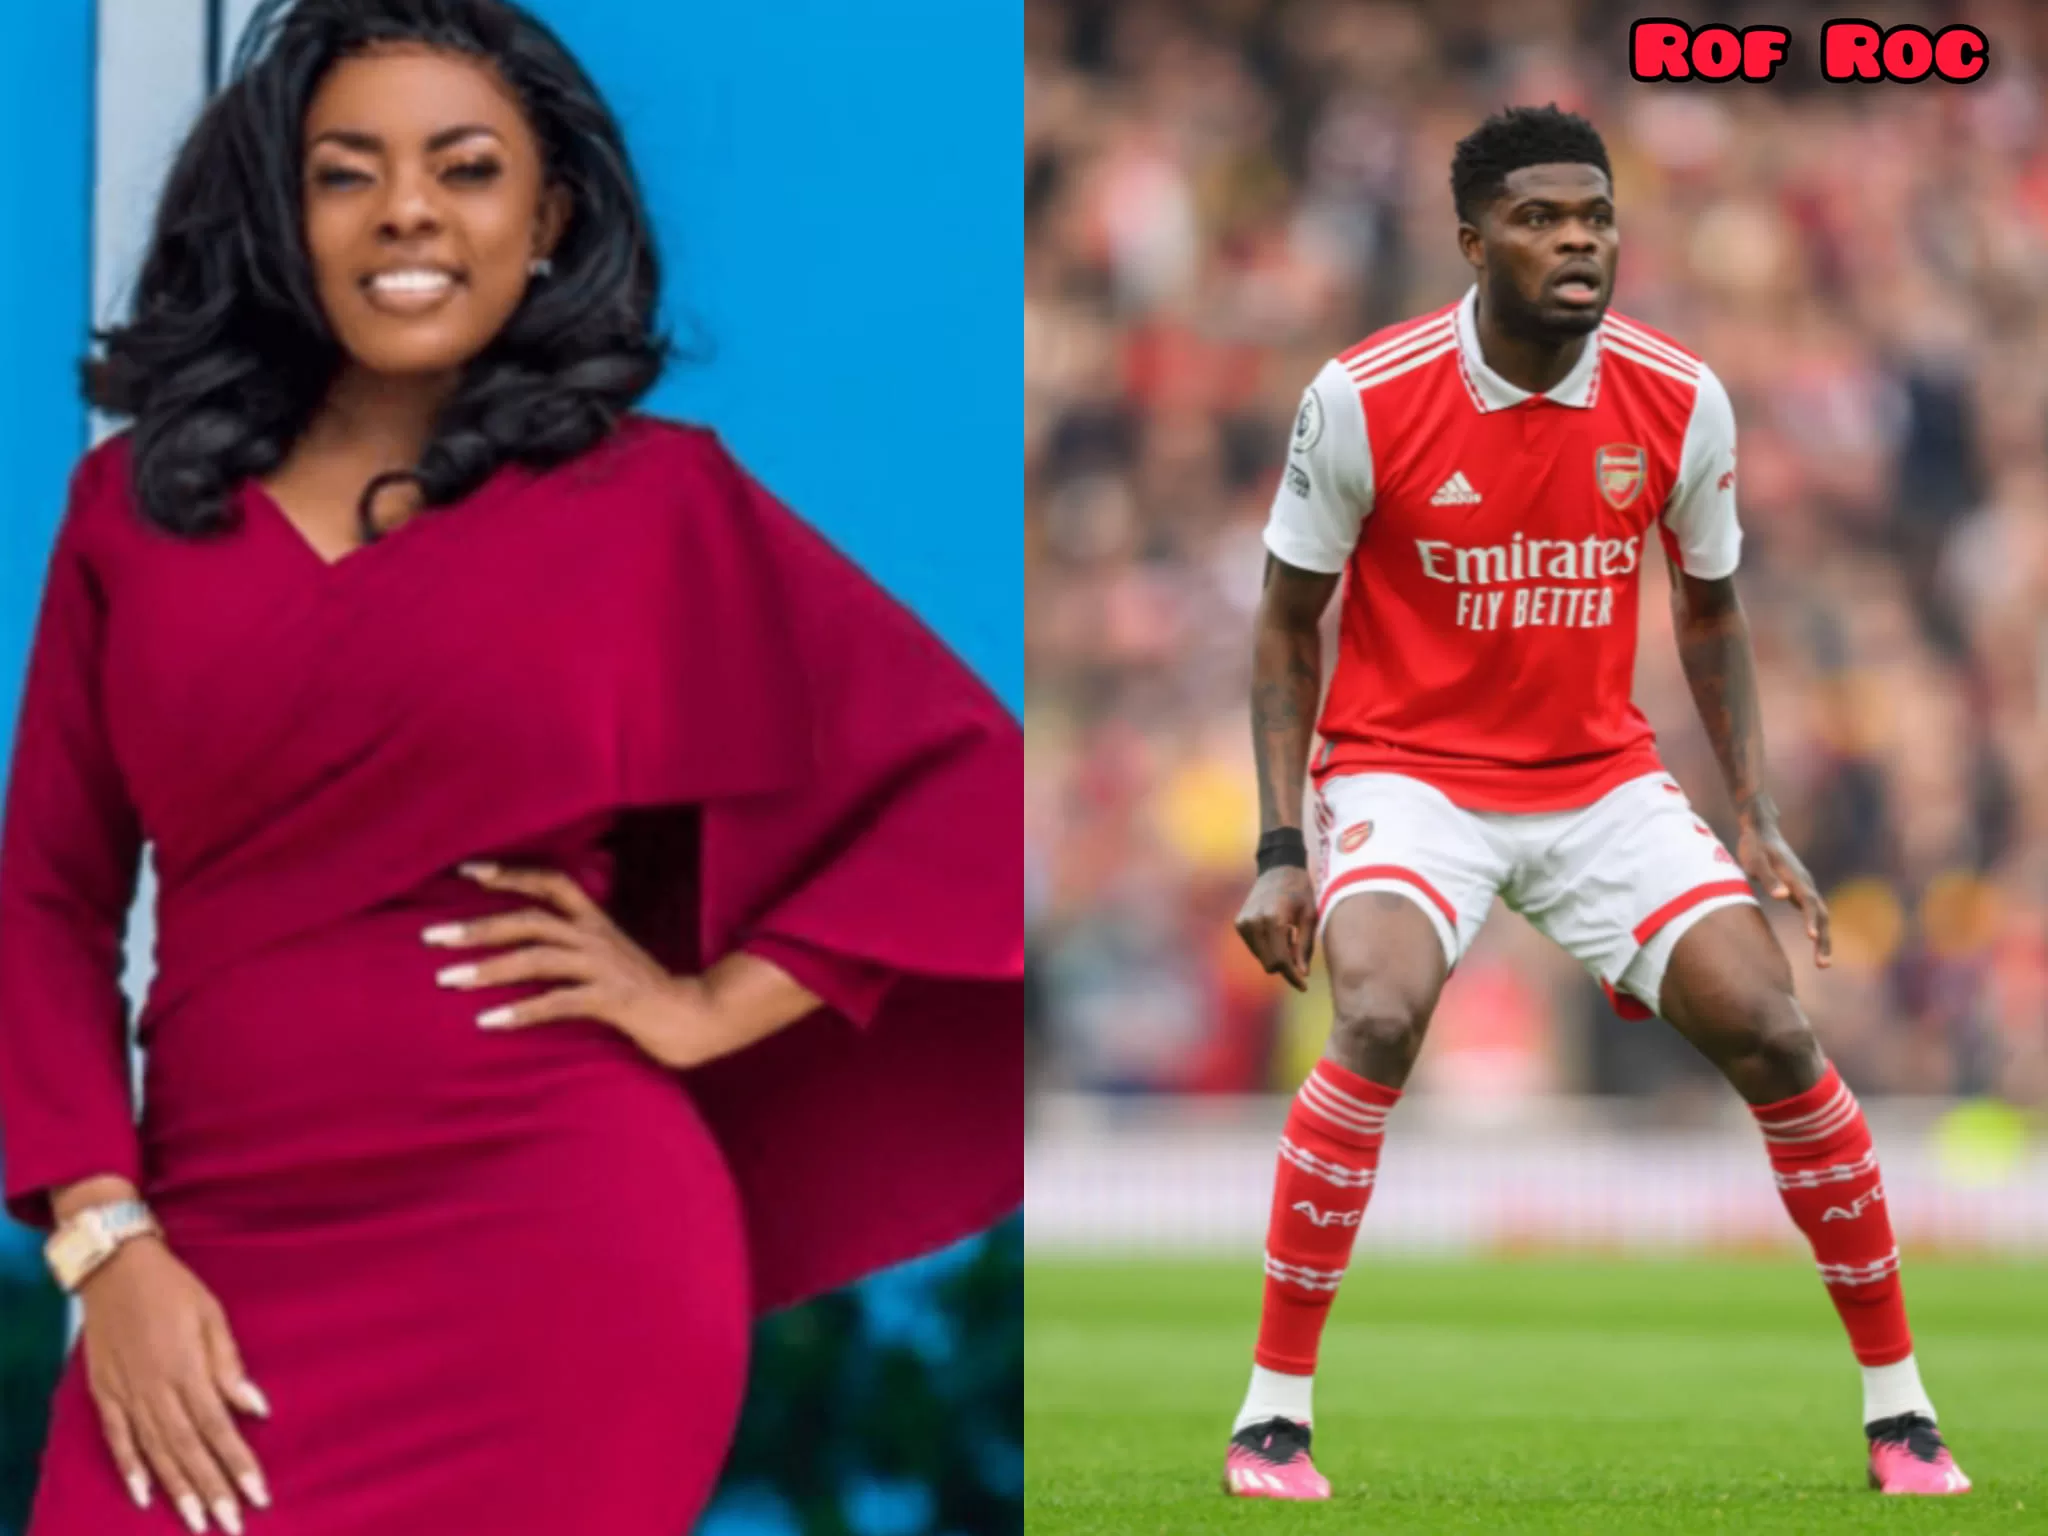 Nana Aba Anamoah Informs Thomas Partey That They're Going Shopping; His Reaction Makes Many People Laugh